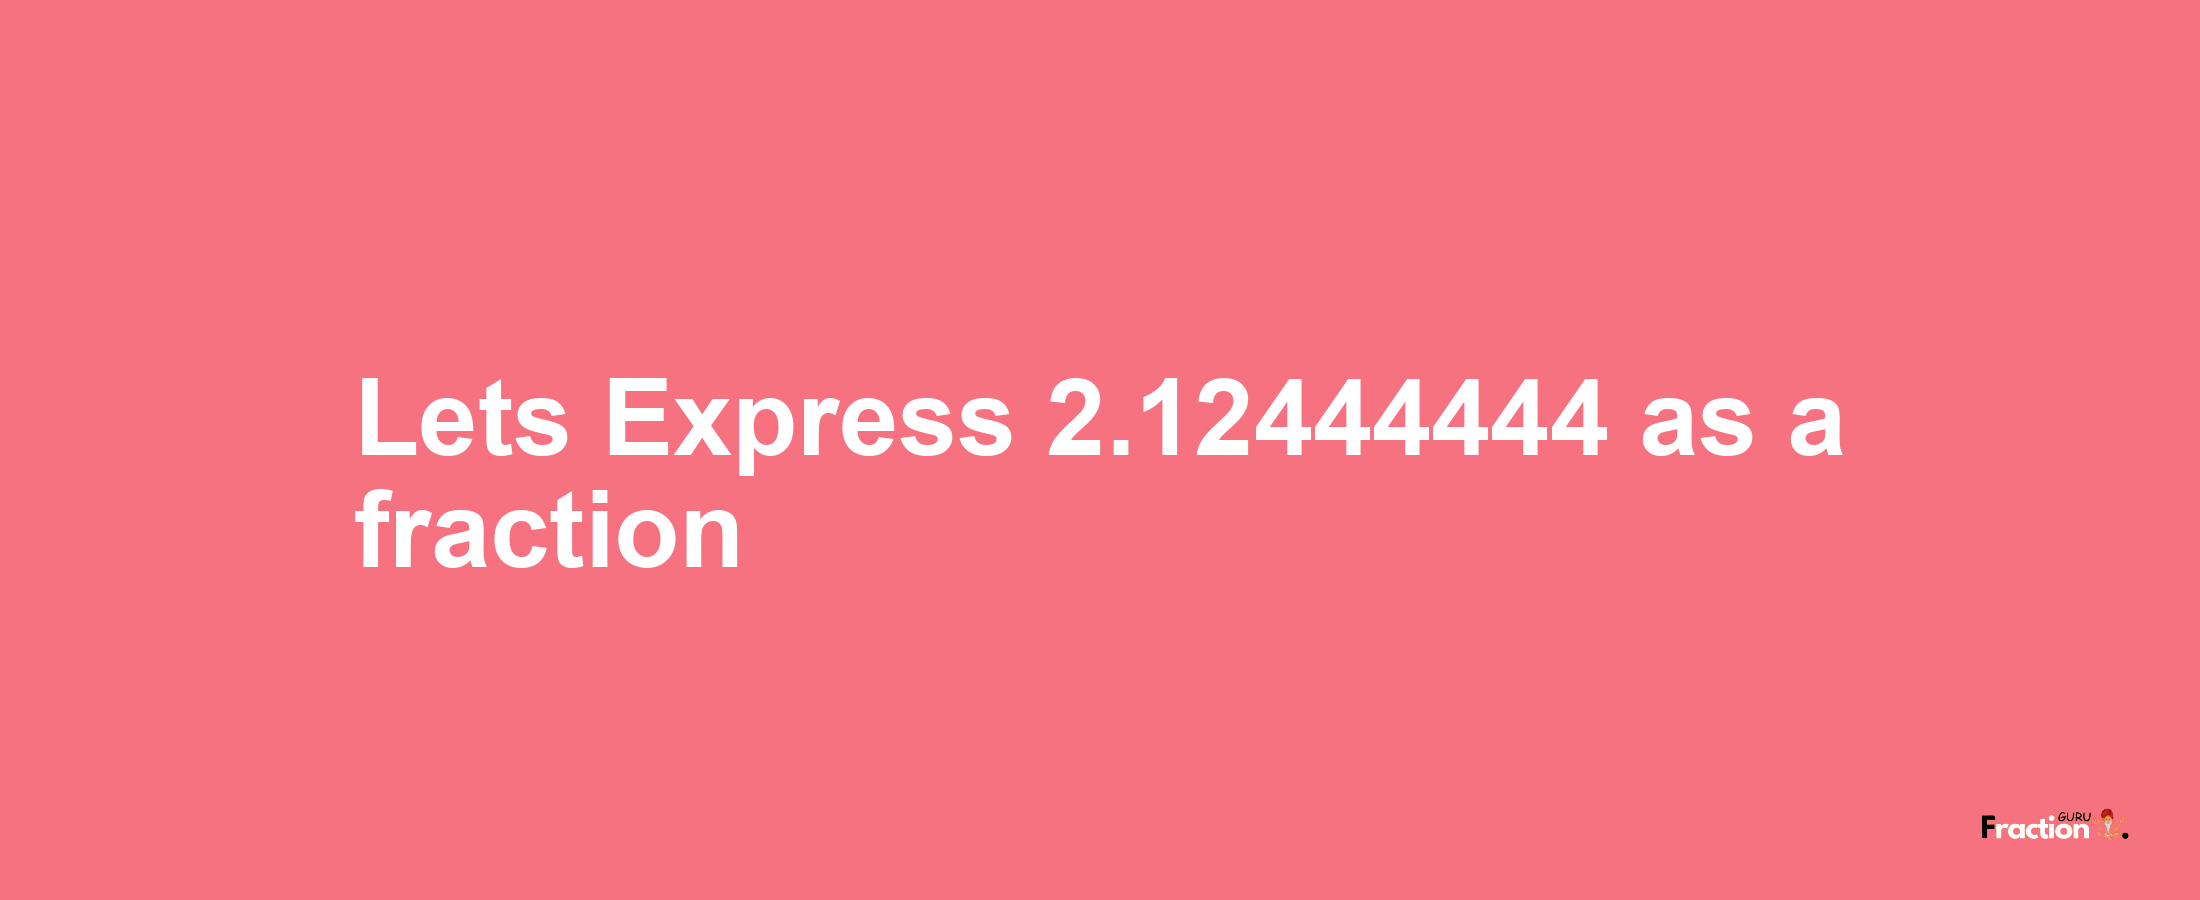 Lets Express 2.12444444 as afraction